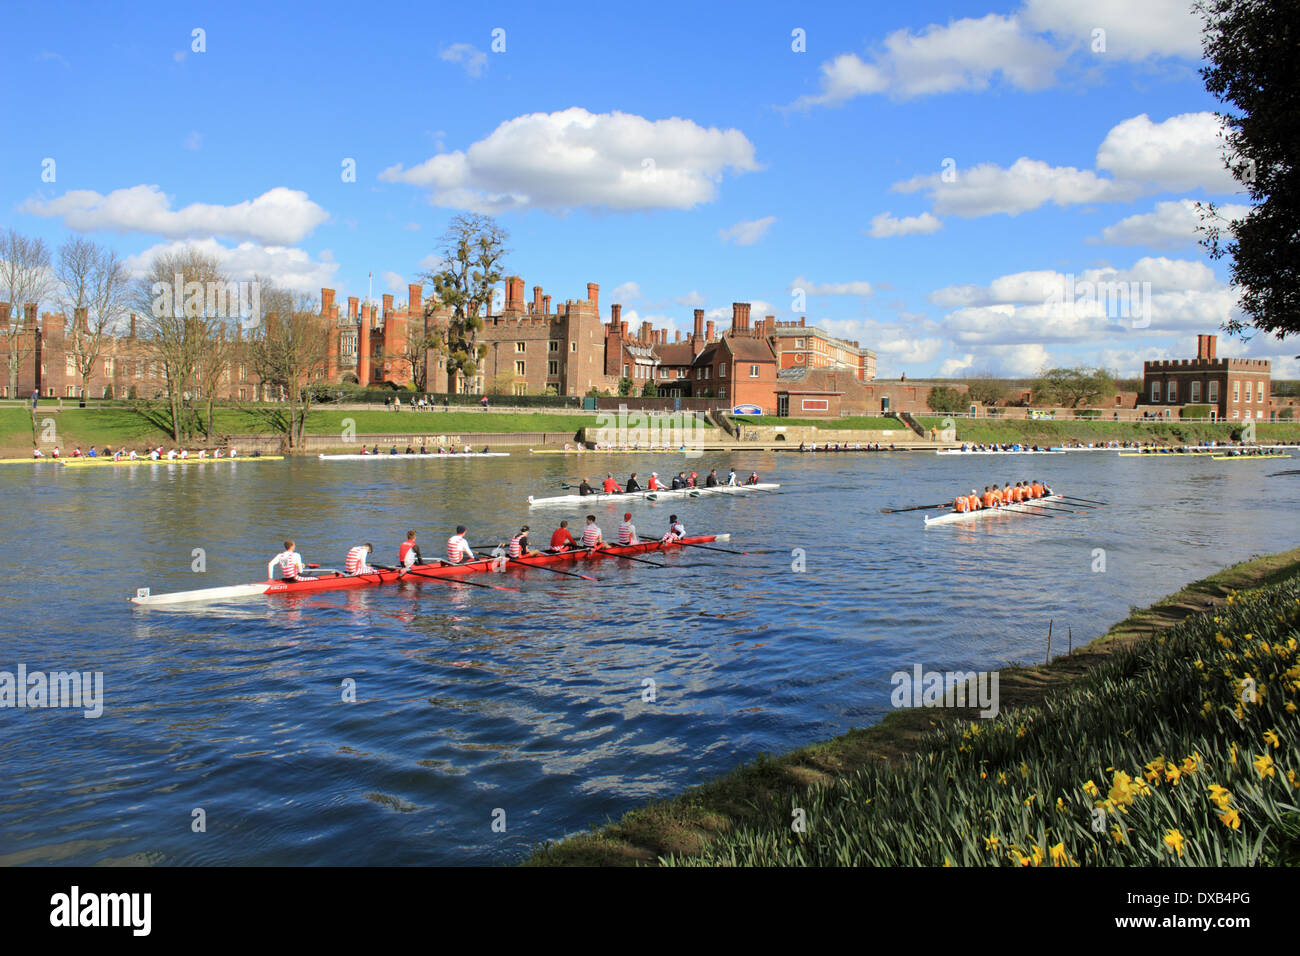 River Thames at Hampton Court, SW London, UK. 22nd March 2014. Preparing for the start of the Kingston Head of the River Race. Over 200 crews were competing in the annual event covering 3 miles of the River Thames between Hampton Court Palace and Kingston Rowing Club. The crews all from the South East of England competed is several classes including Eights, Fours, Sculls and Rowers, with Senior, Junior, Mens and Womens teams. Results not yet available. Credit:  Julia Gavin/Alamy Live News Stock Photo